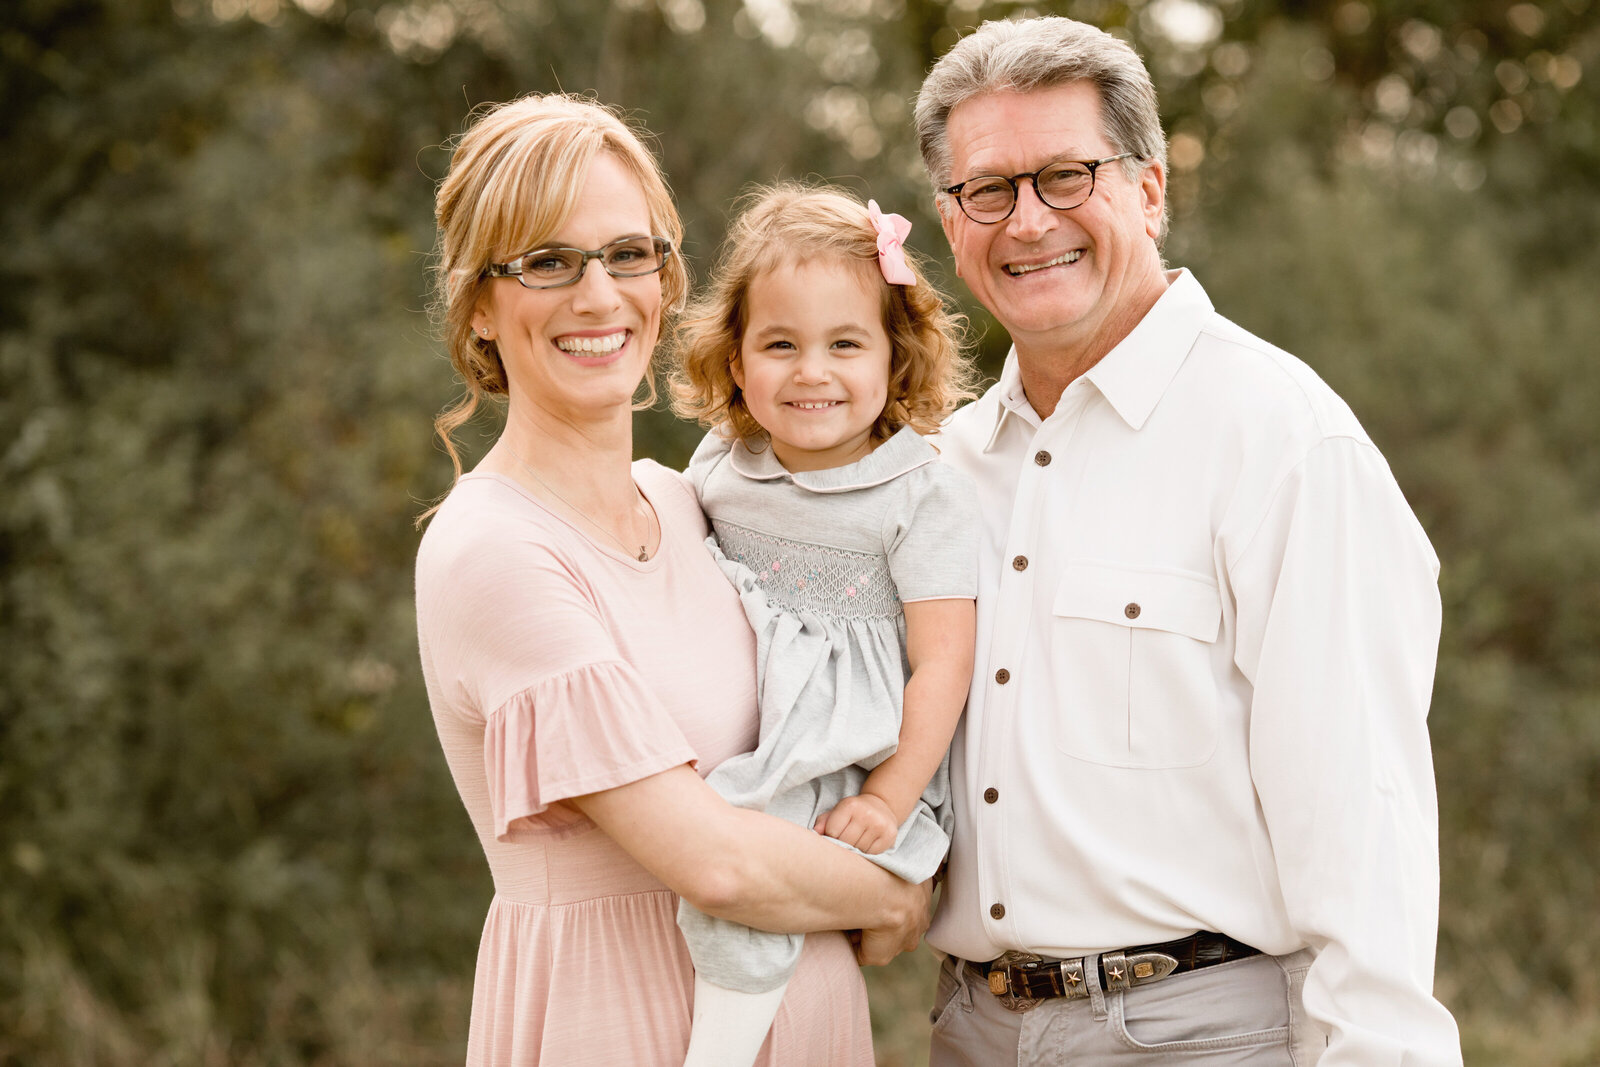 Carolyn Teague smiles while holding her daughter next to her husband in family portrait